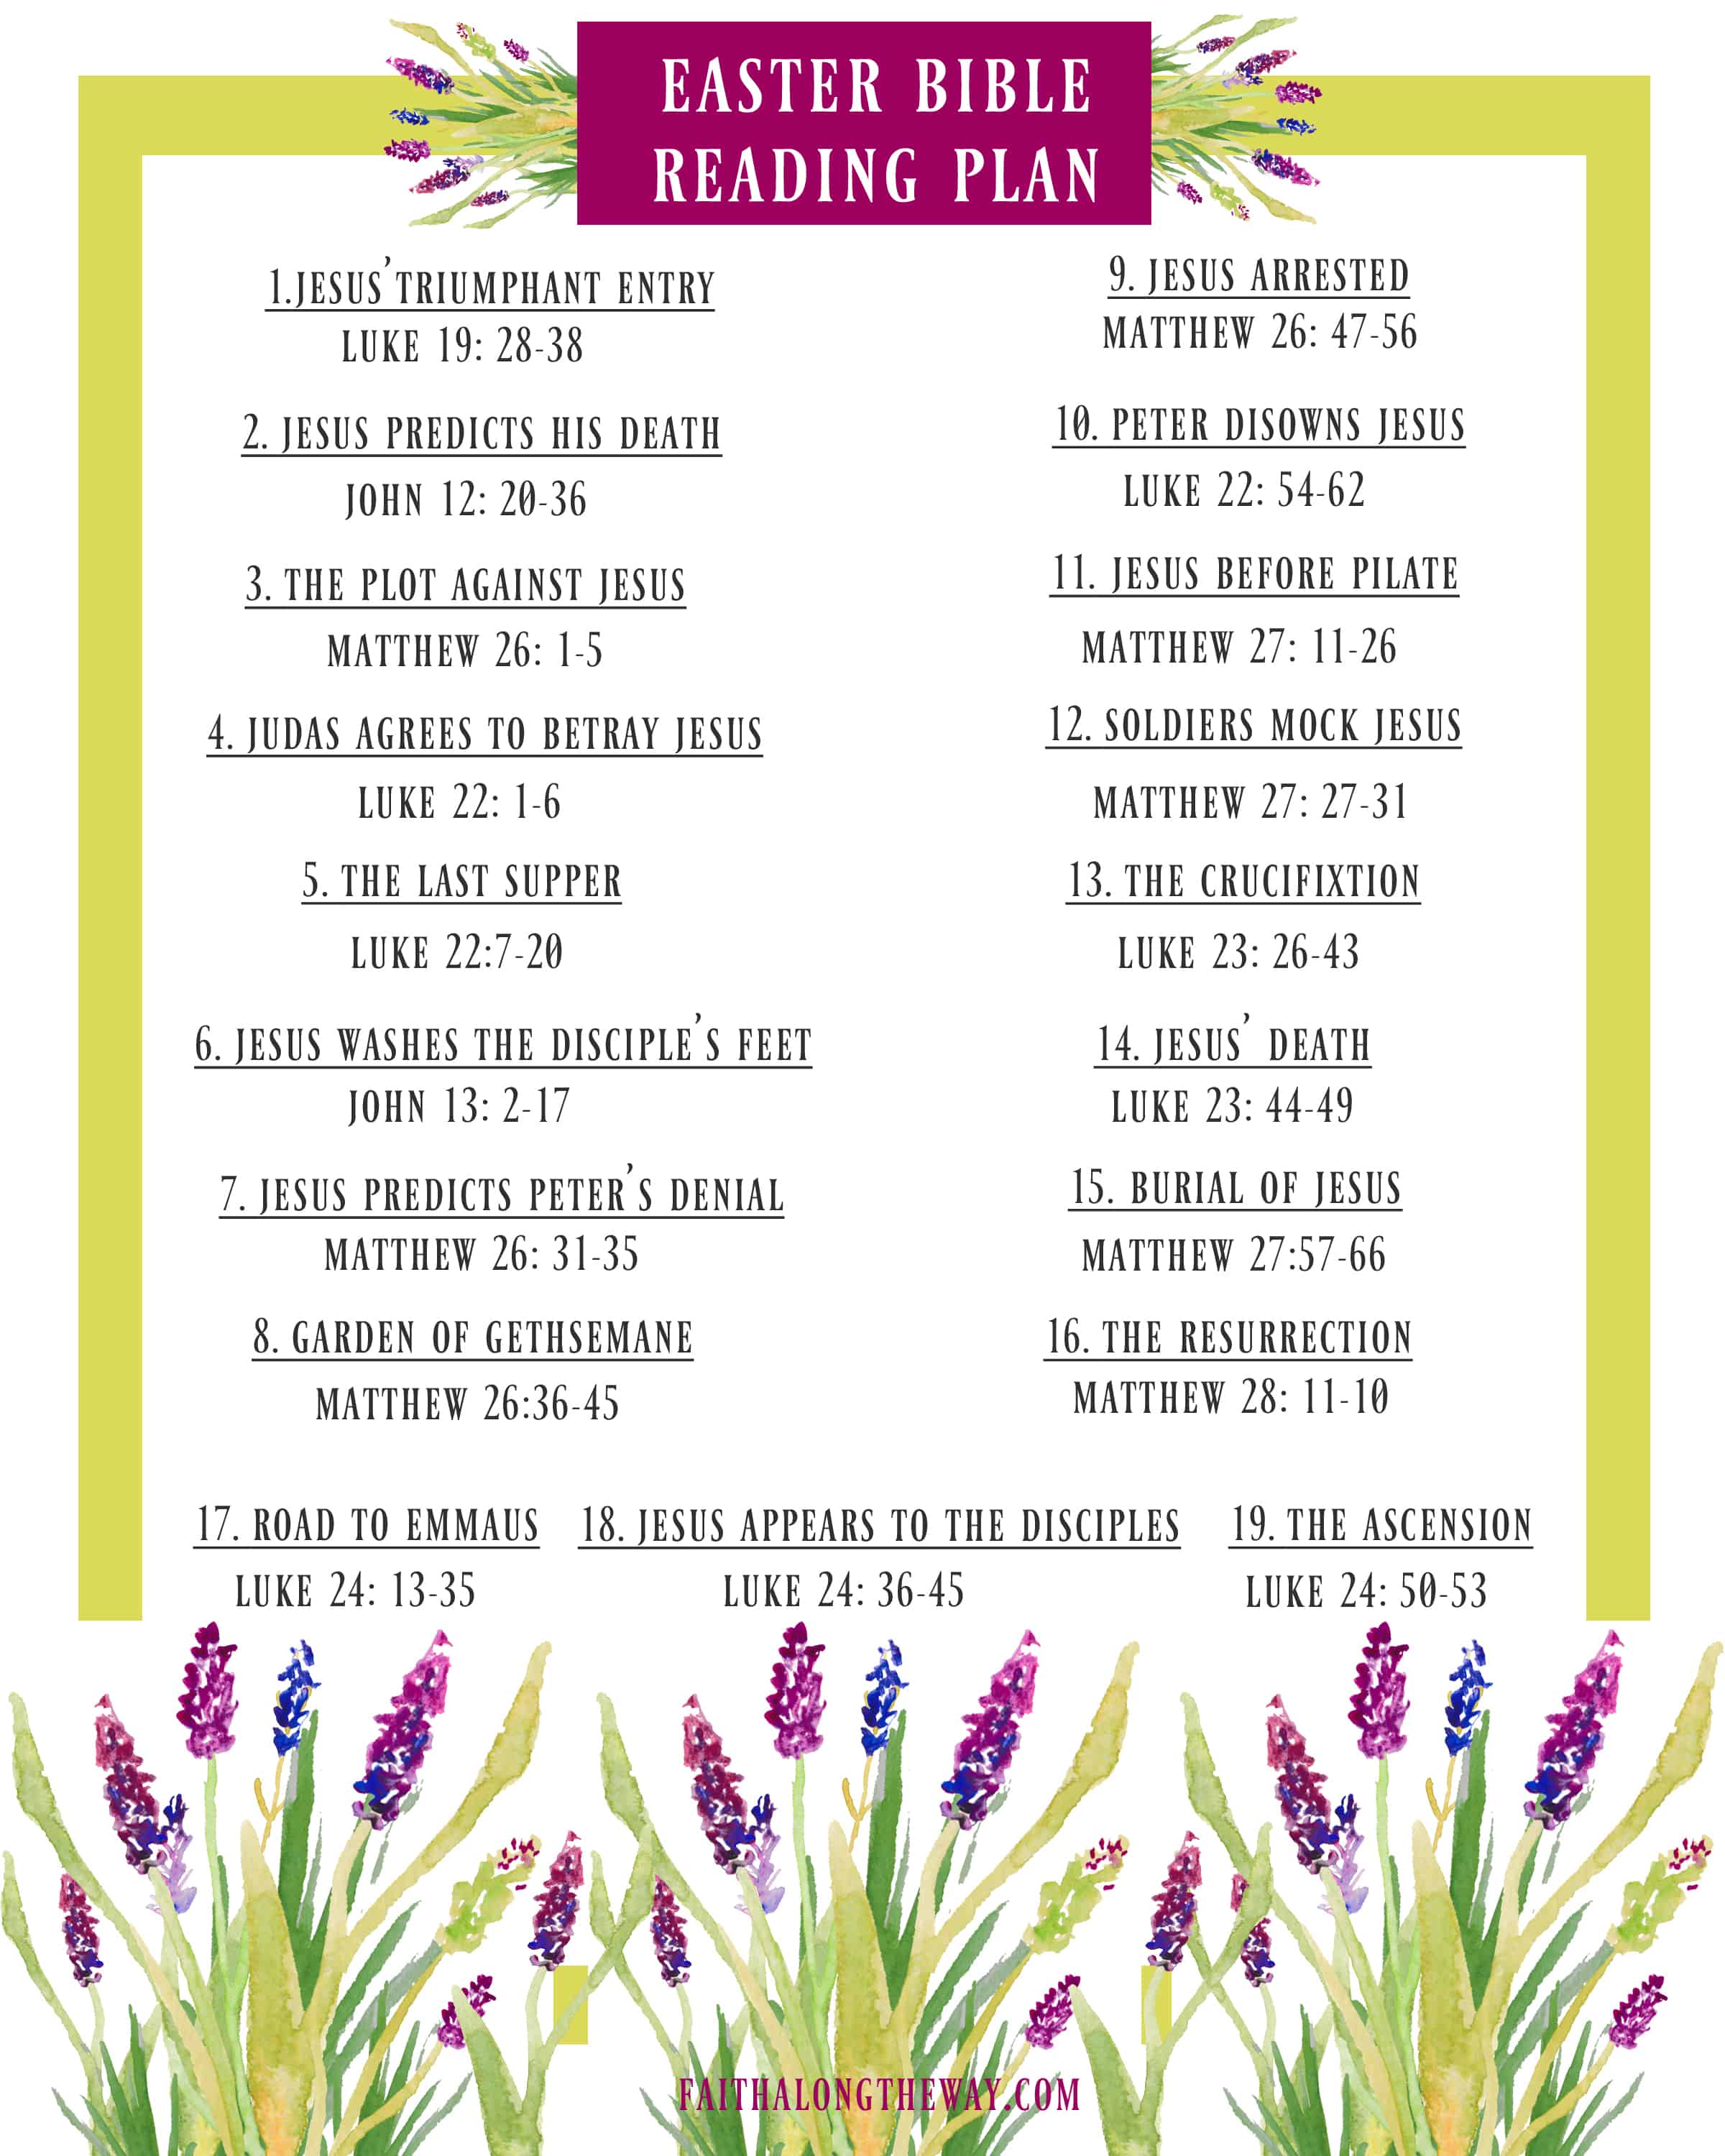 Renew your soul & prepare your heart for Easter. This FREE printable Easter Bible Reading Plan is perfect for family Bible study, too!